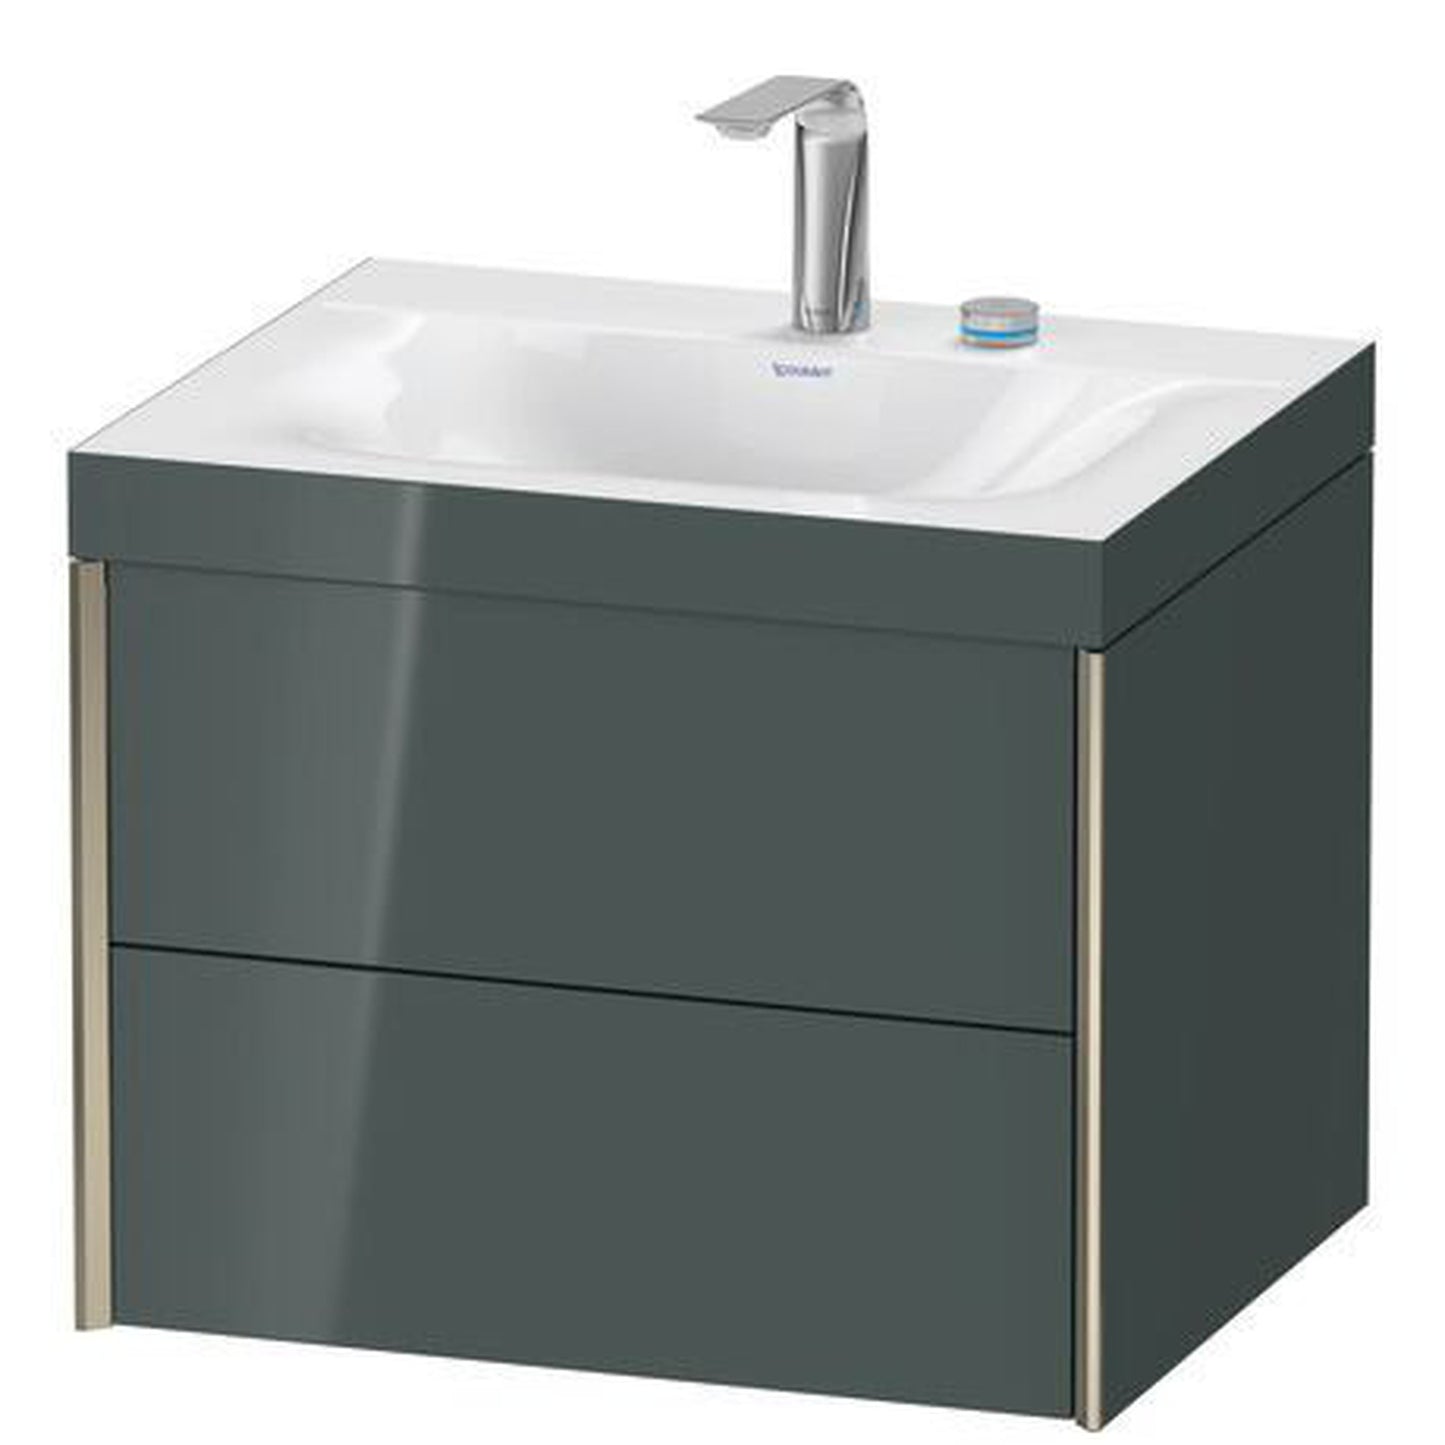 Duravit Xviu 24" x 20" x 19" Two Drawer C-Bonded Wall-Mount Vanity Kit With Two Tap Holes, Dolomite Gray (XV4614EB138C)